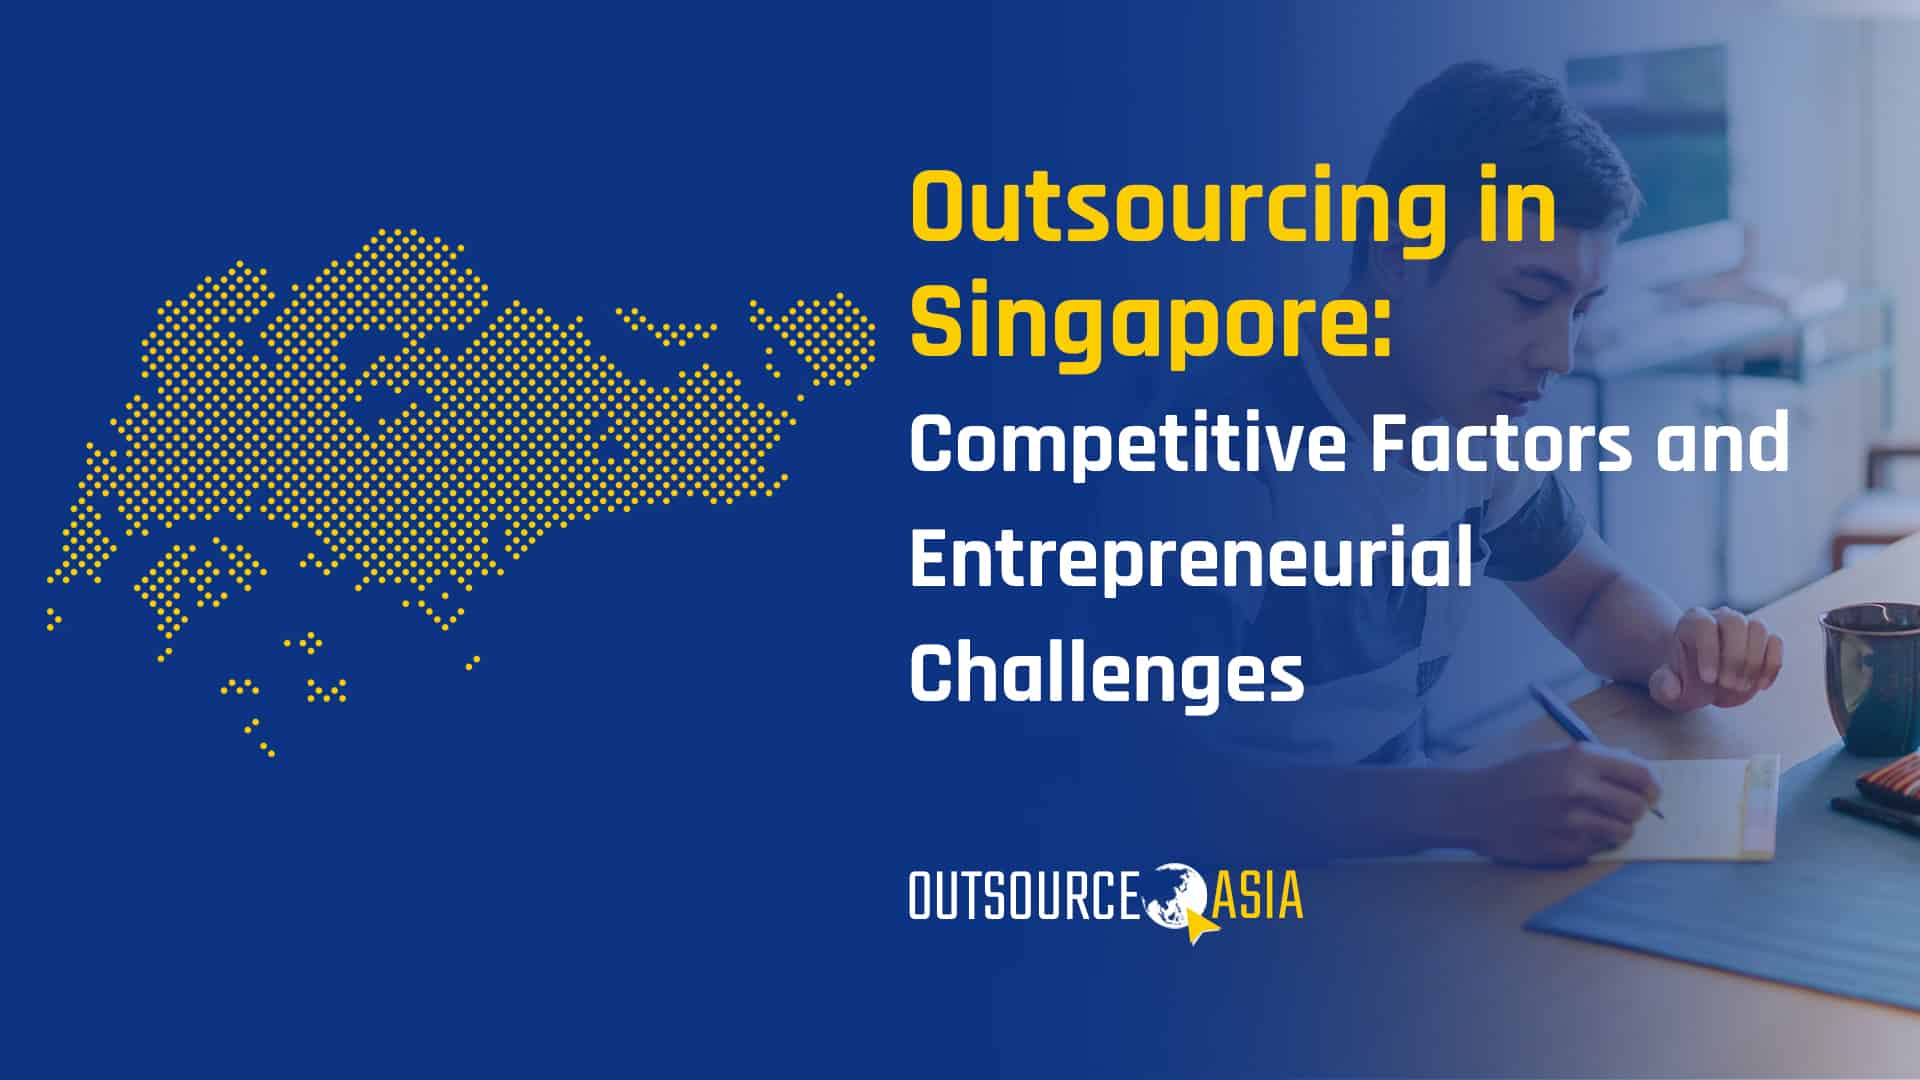 Outsourcing in Singapore